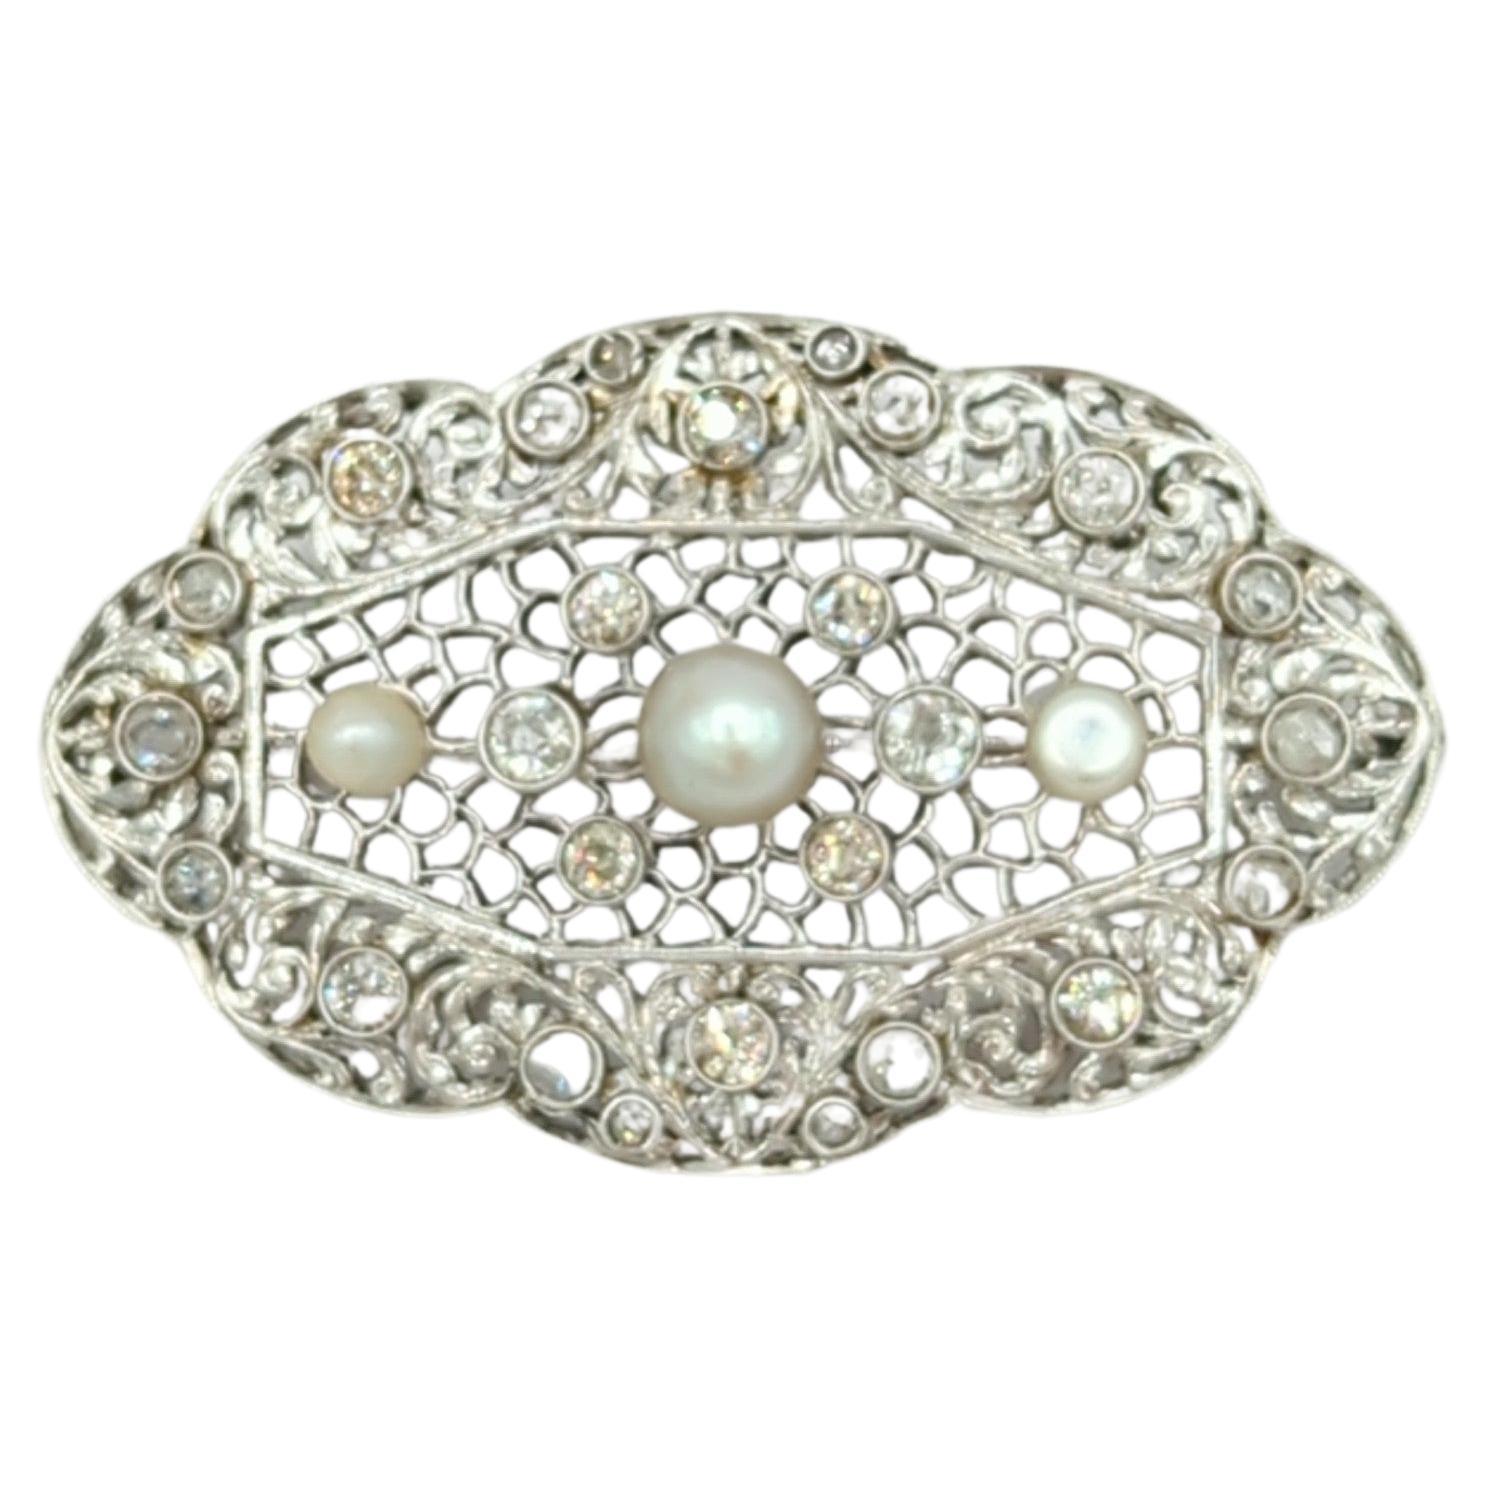 White Diamond and White Pearl Brooch in 18K White Gold